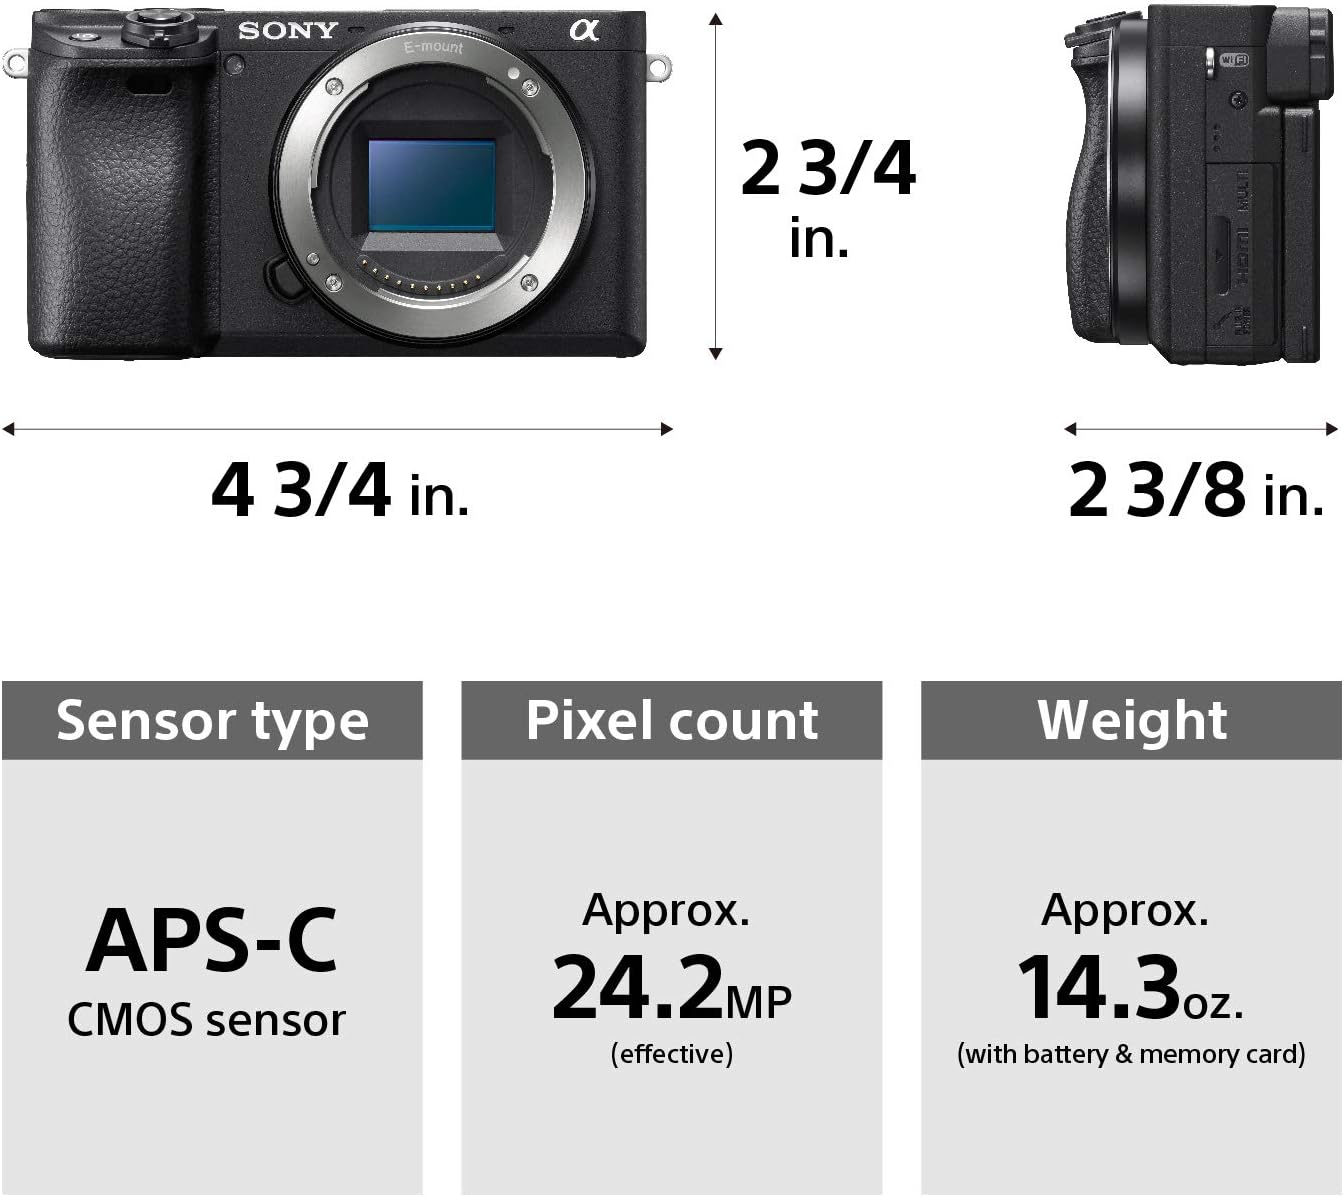 Sony Alpha a6400 Mirrorless Camera: Compact APS-C Interchangeable Lens Digital Camera with Real-Time Eye Auto Focus, 4K Video & Flip Up Touchscreen - E Mount Compatible Cameras - ILCE-6400/B Body